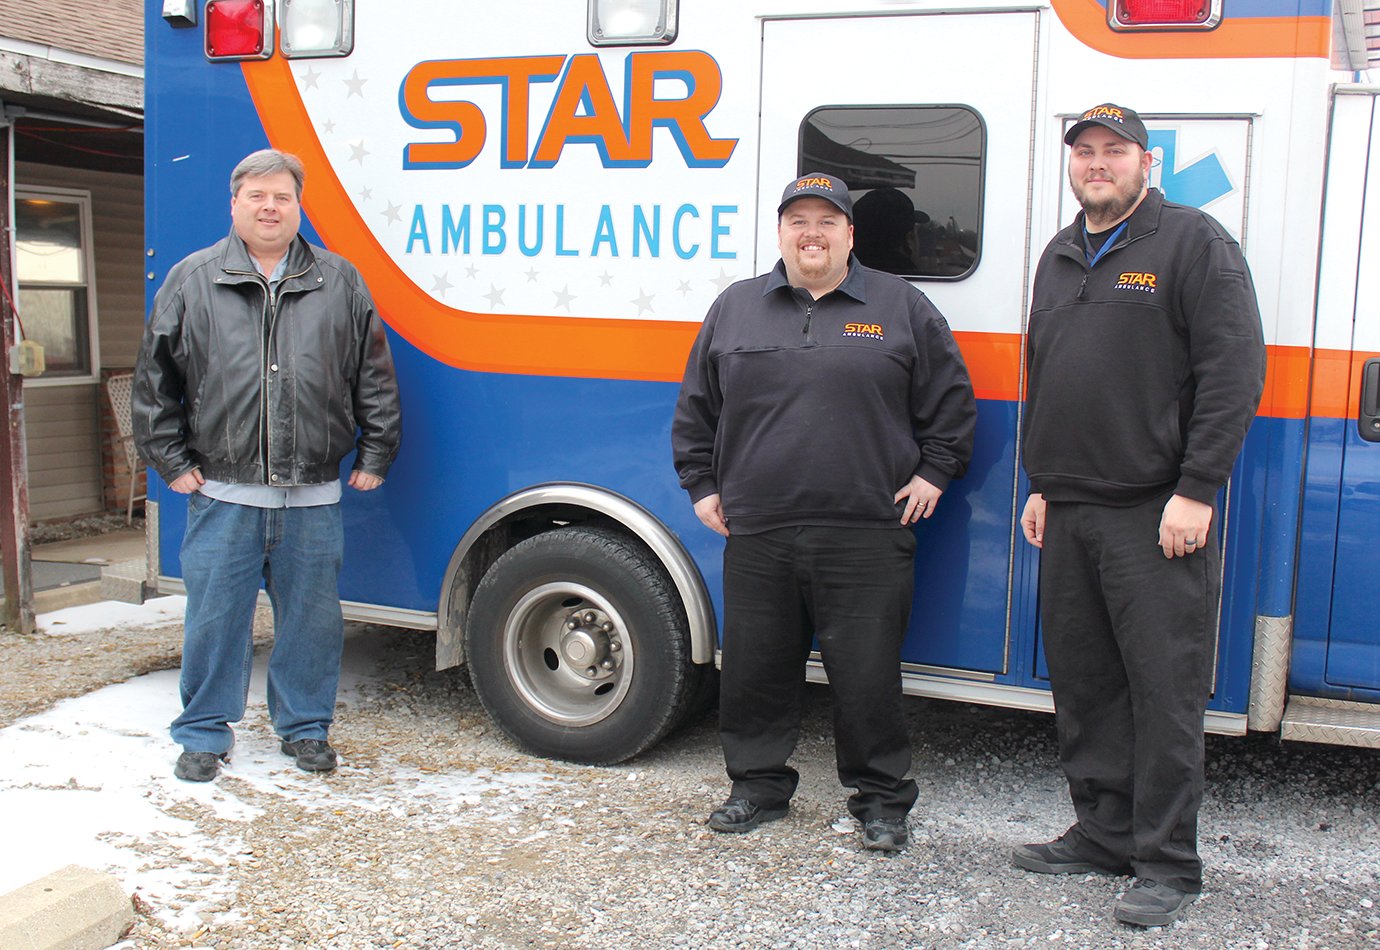 S.T.A.R. Ambulance owner and director Matt Peck, from left, braves the cold alongside son and fellow director Dave Peck, as well as paramedic Dustin Miller, at the southside ambulance center.